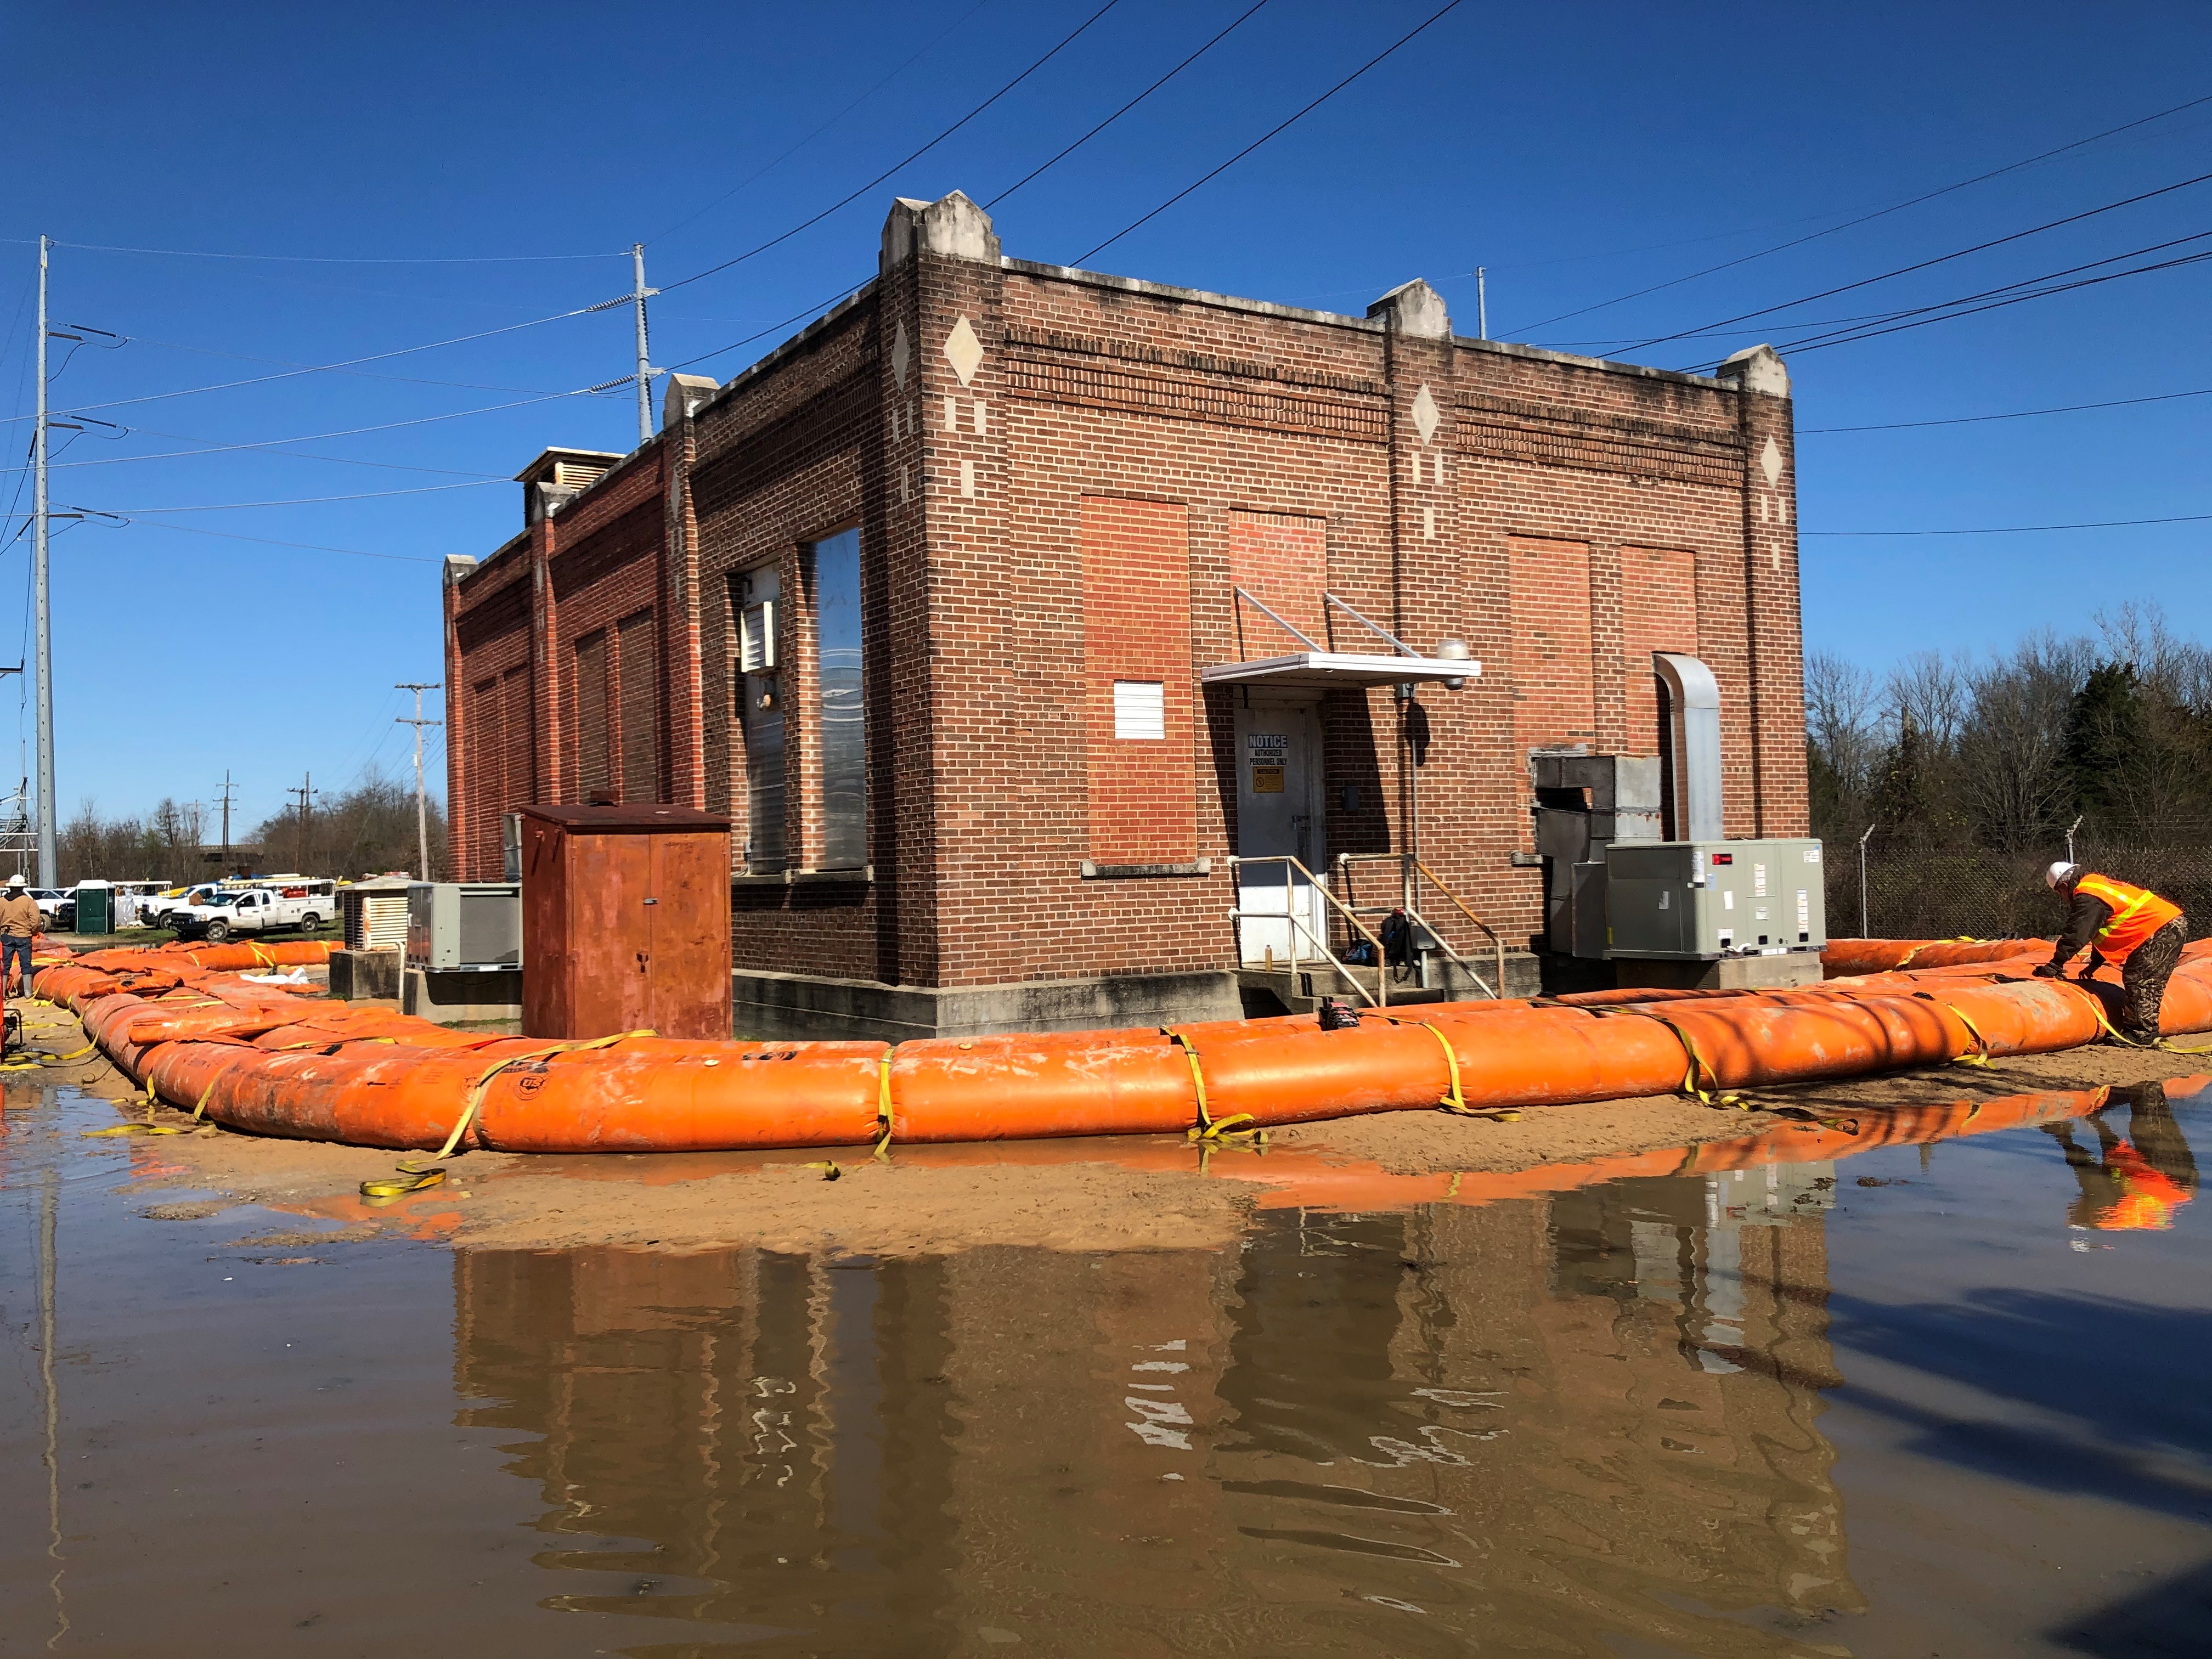 Crews built a tiger dam around the control house at the south Jackson substation to mitigate flooding issues. The substation has been de-entergized.